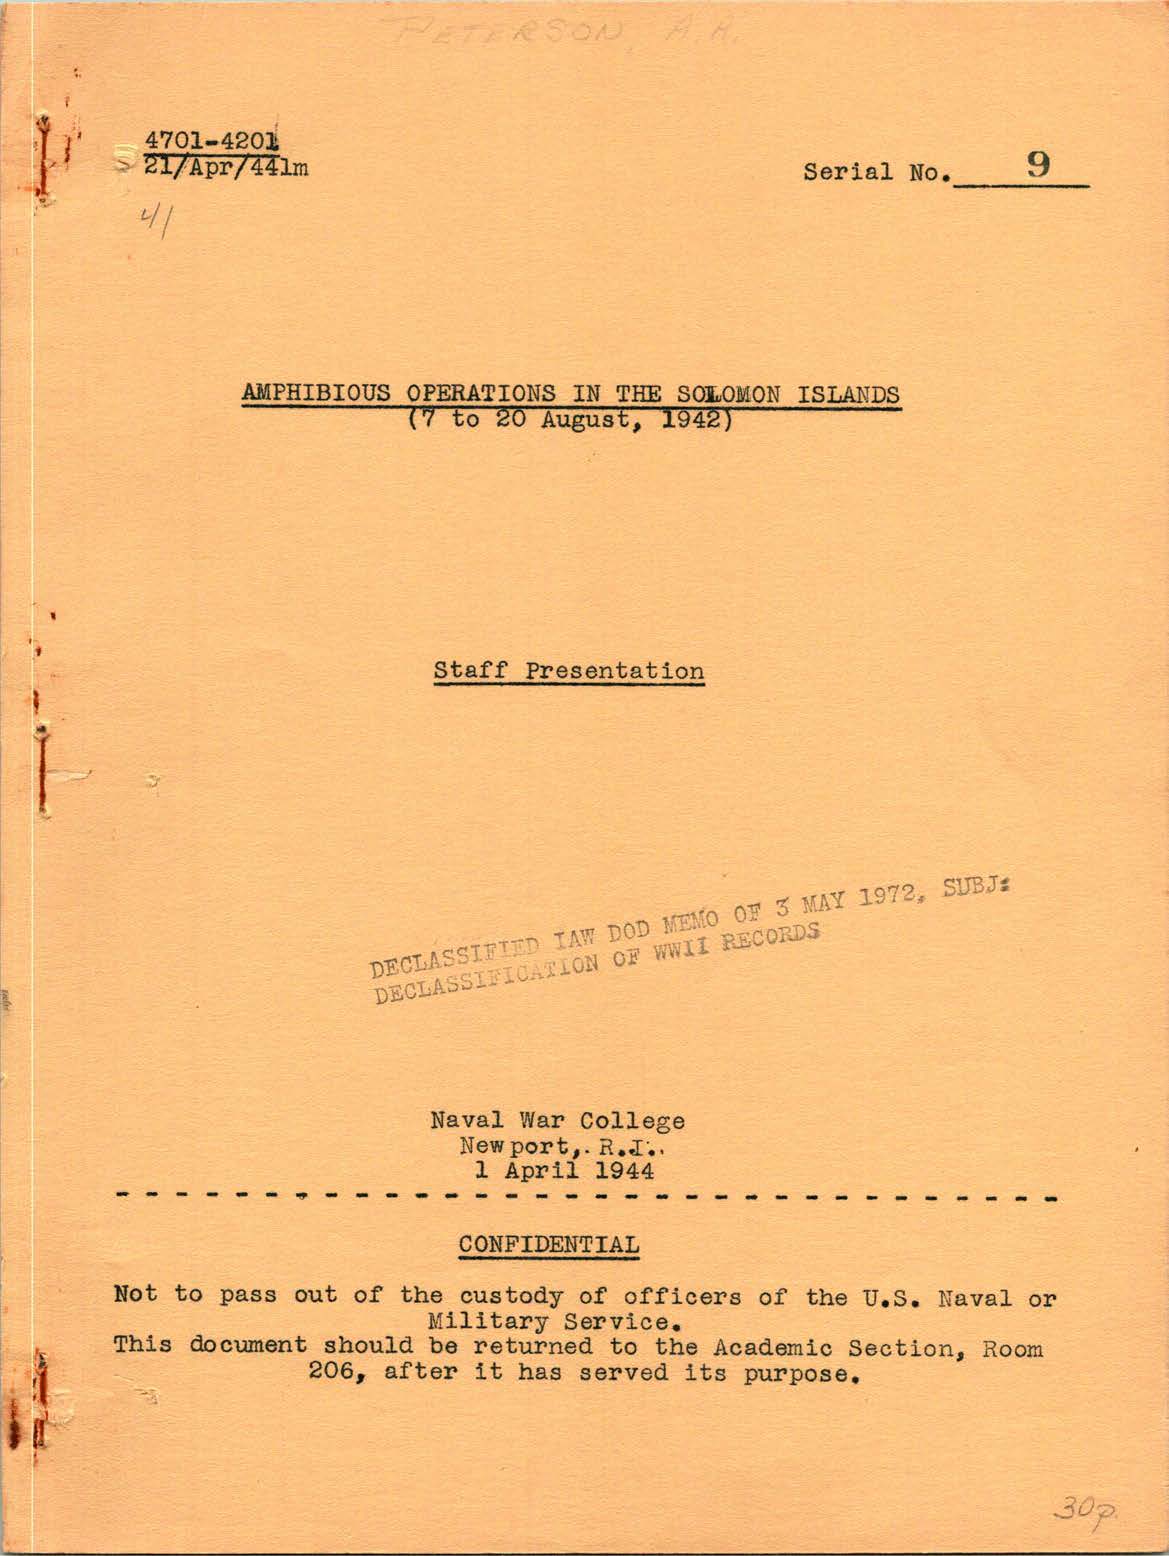 Amphibious Operations in the Solomon Islands (7 to 20 August, 1942), A. A. Peterson